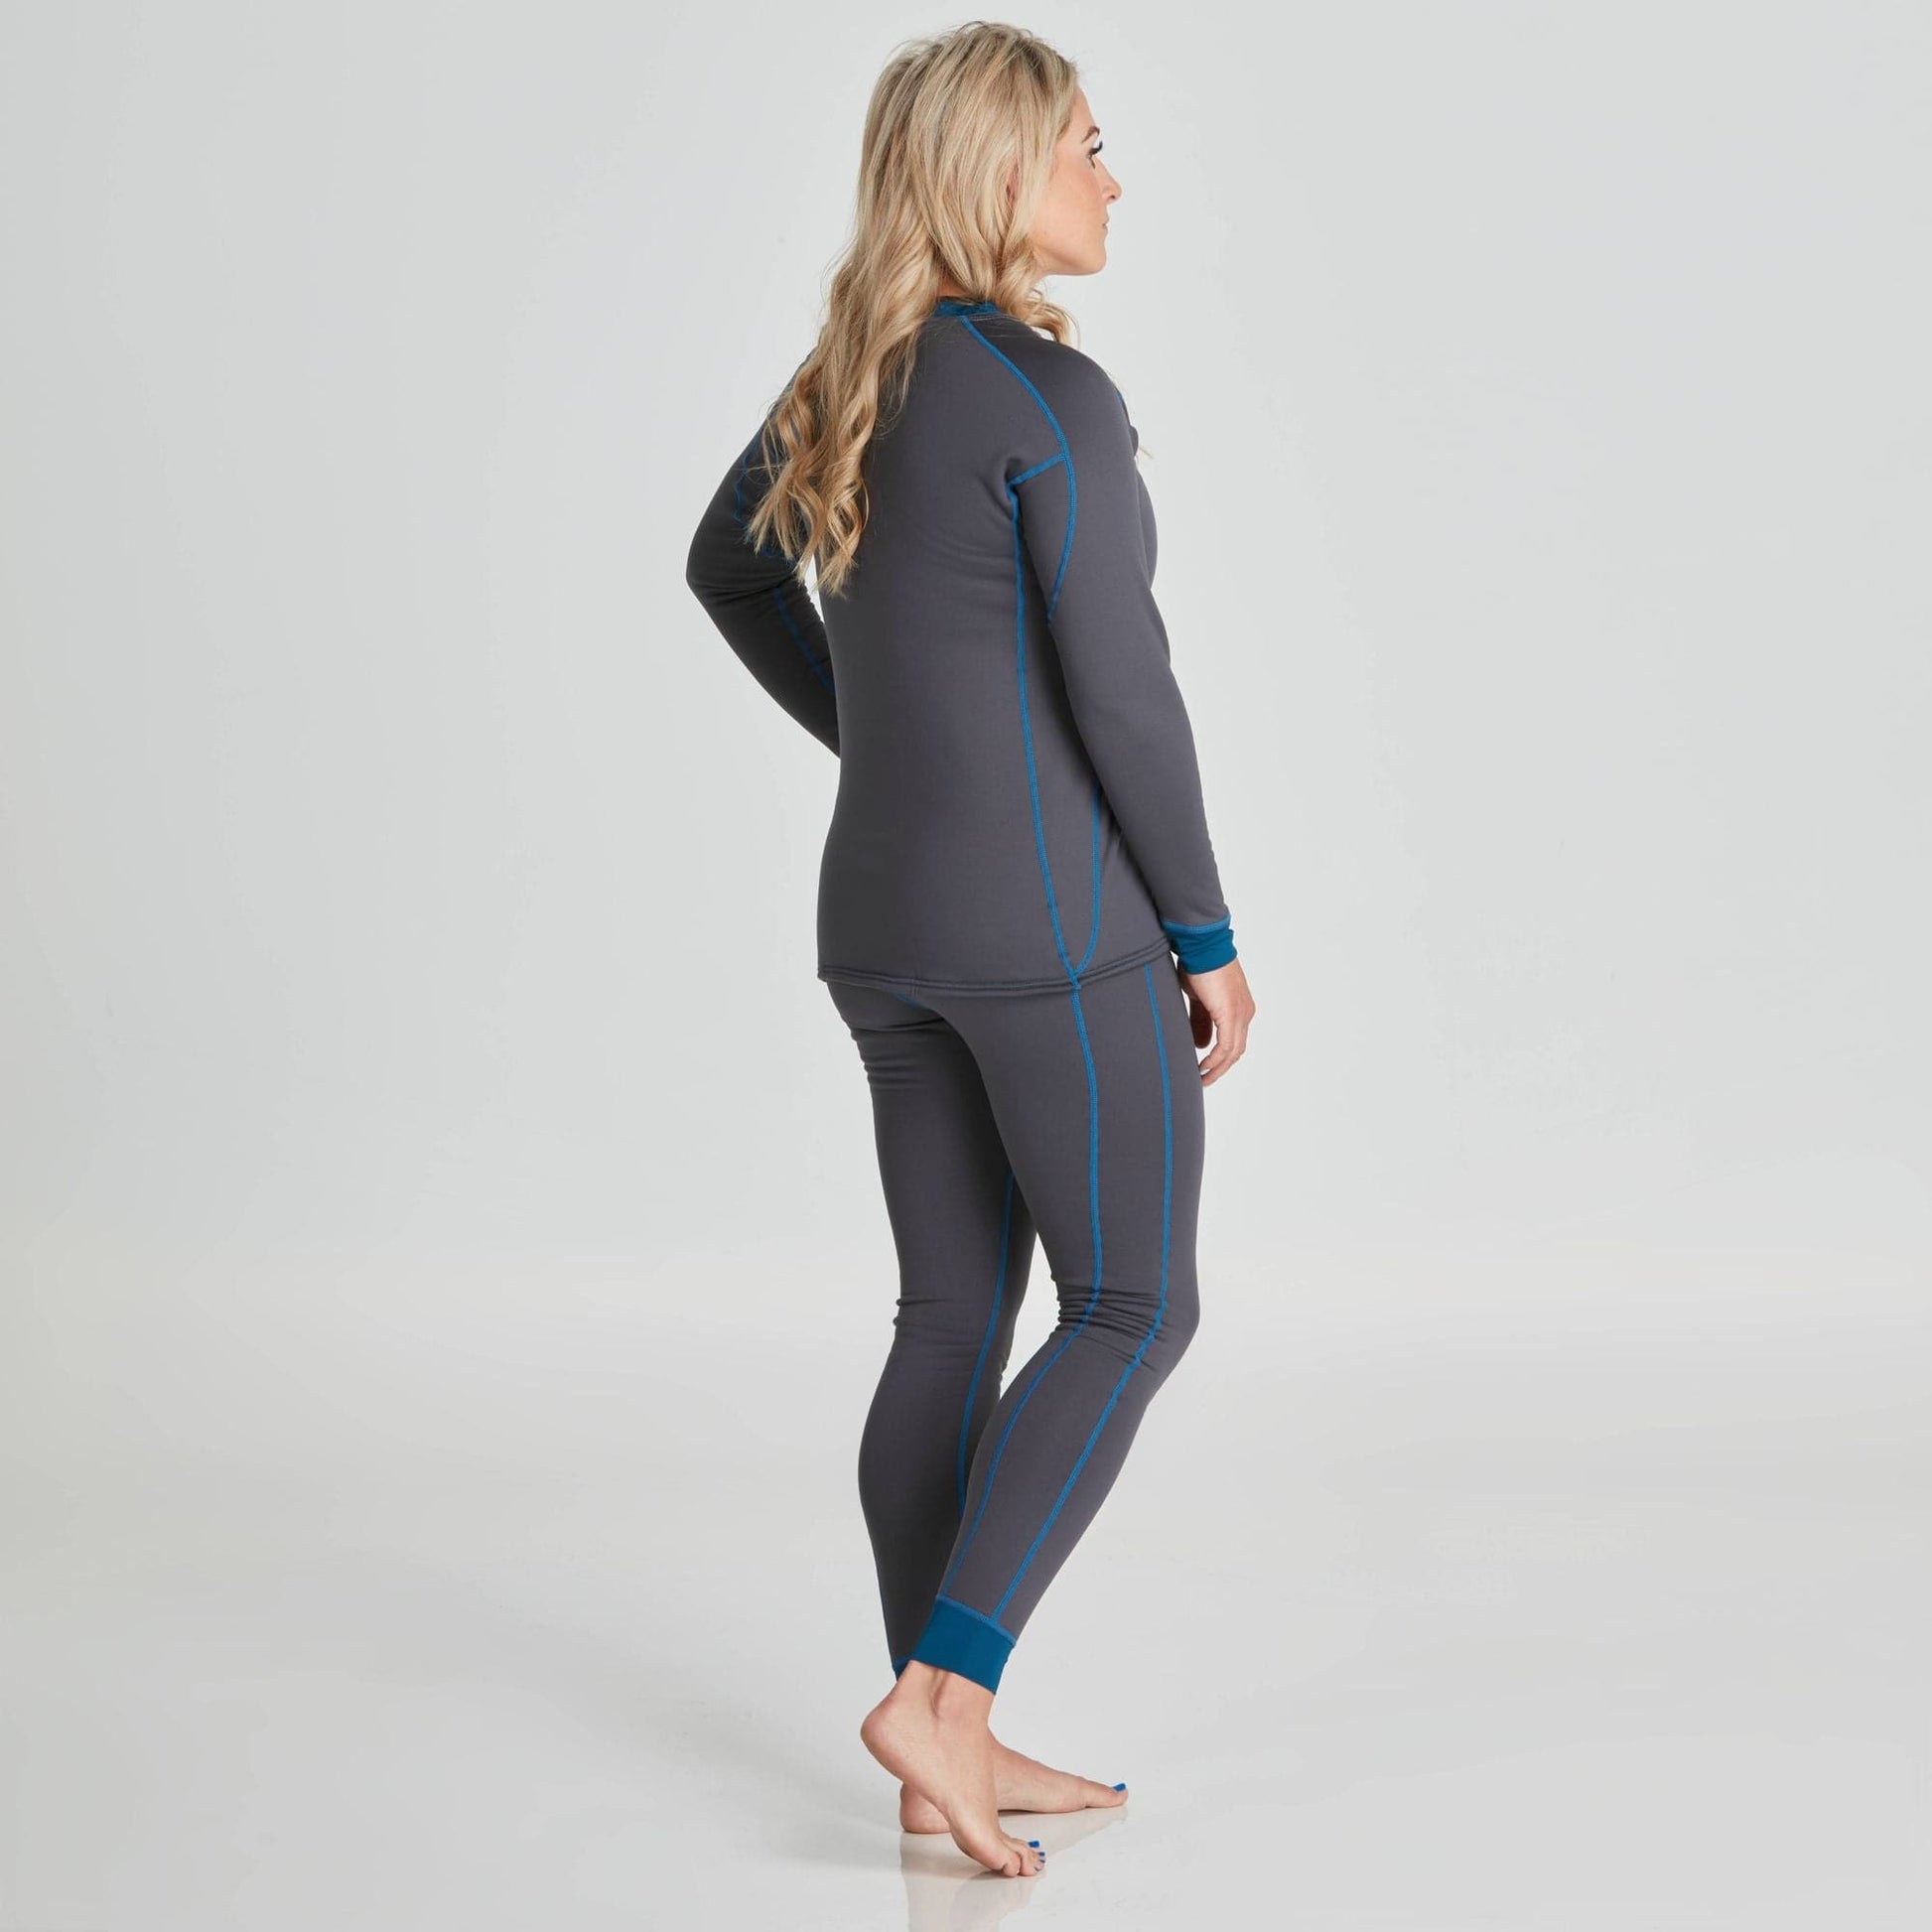 Featuring the Expedition Fleece W's shirt, women's thermal layering manufactured by NRS shown here from a fourth angle.